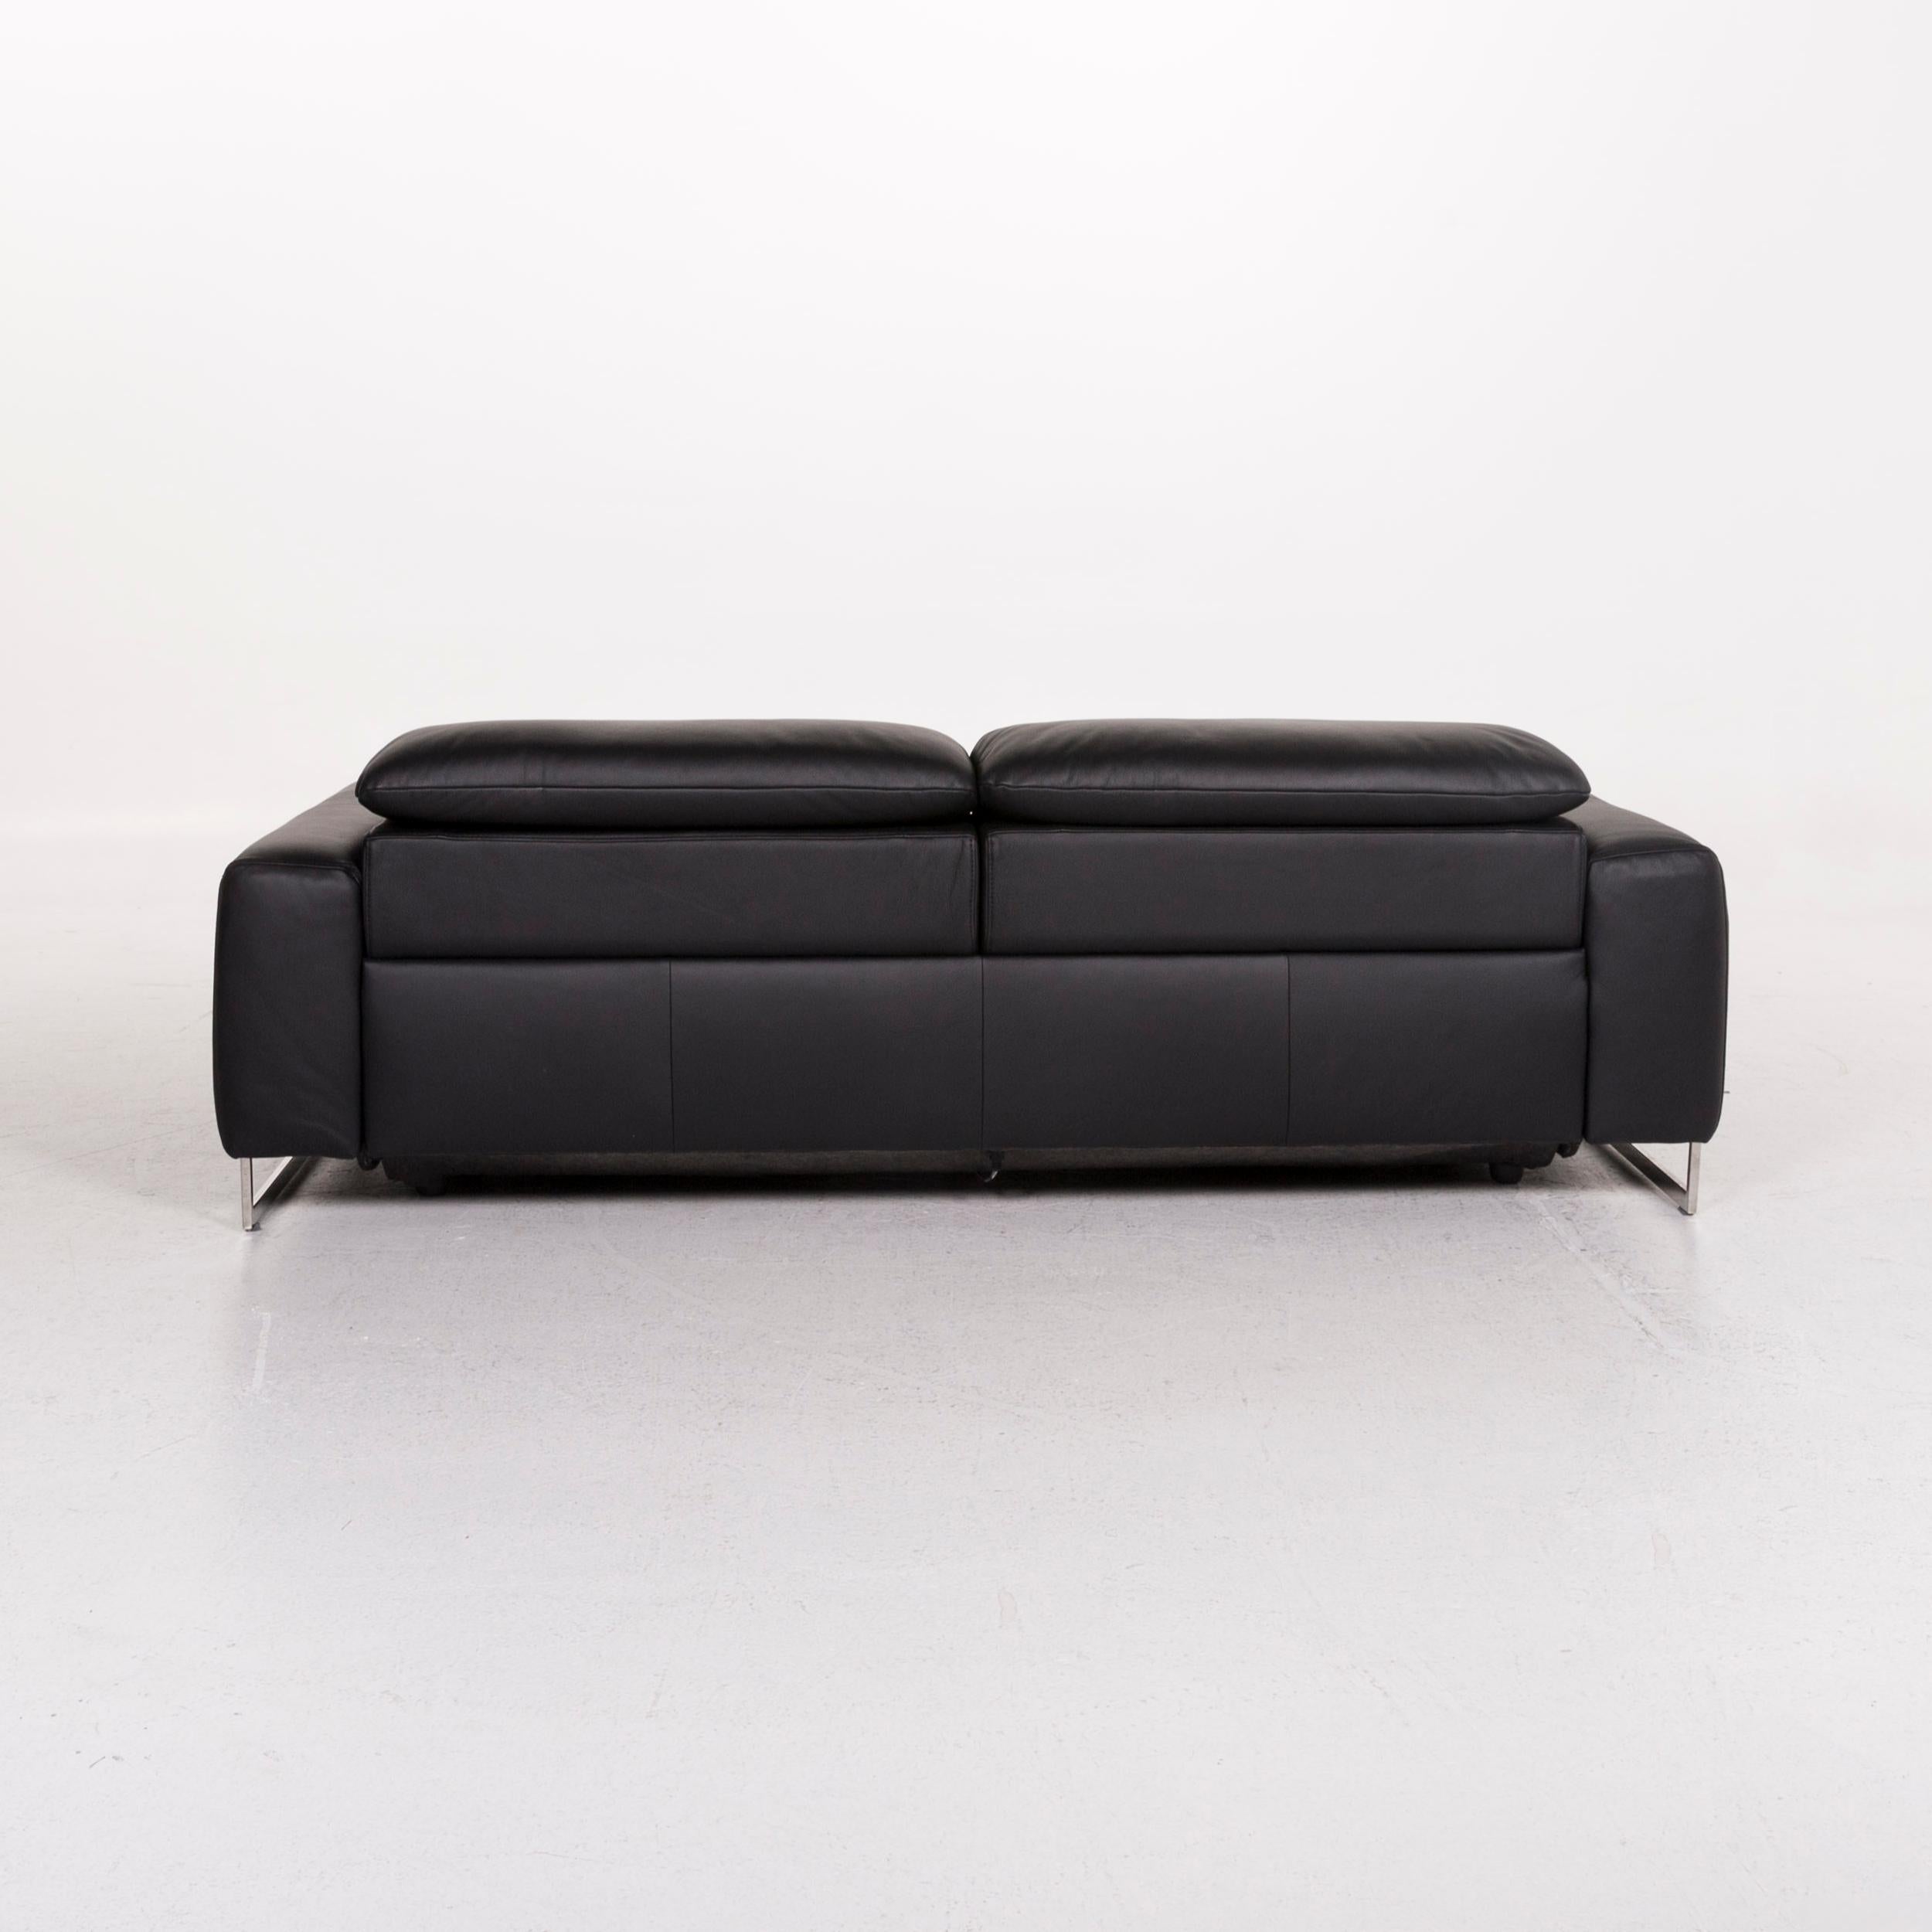 Contemporary Joop Leather Sofa Black Two-Seat Function Relax Function Couch For Sale